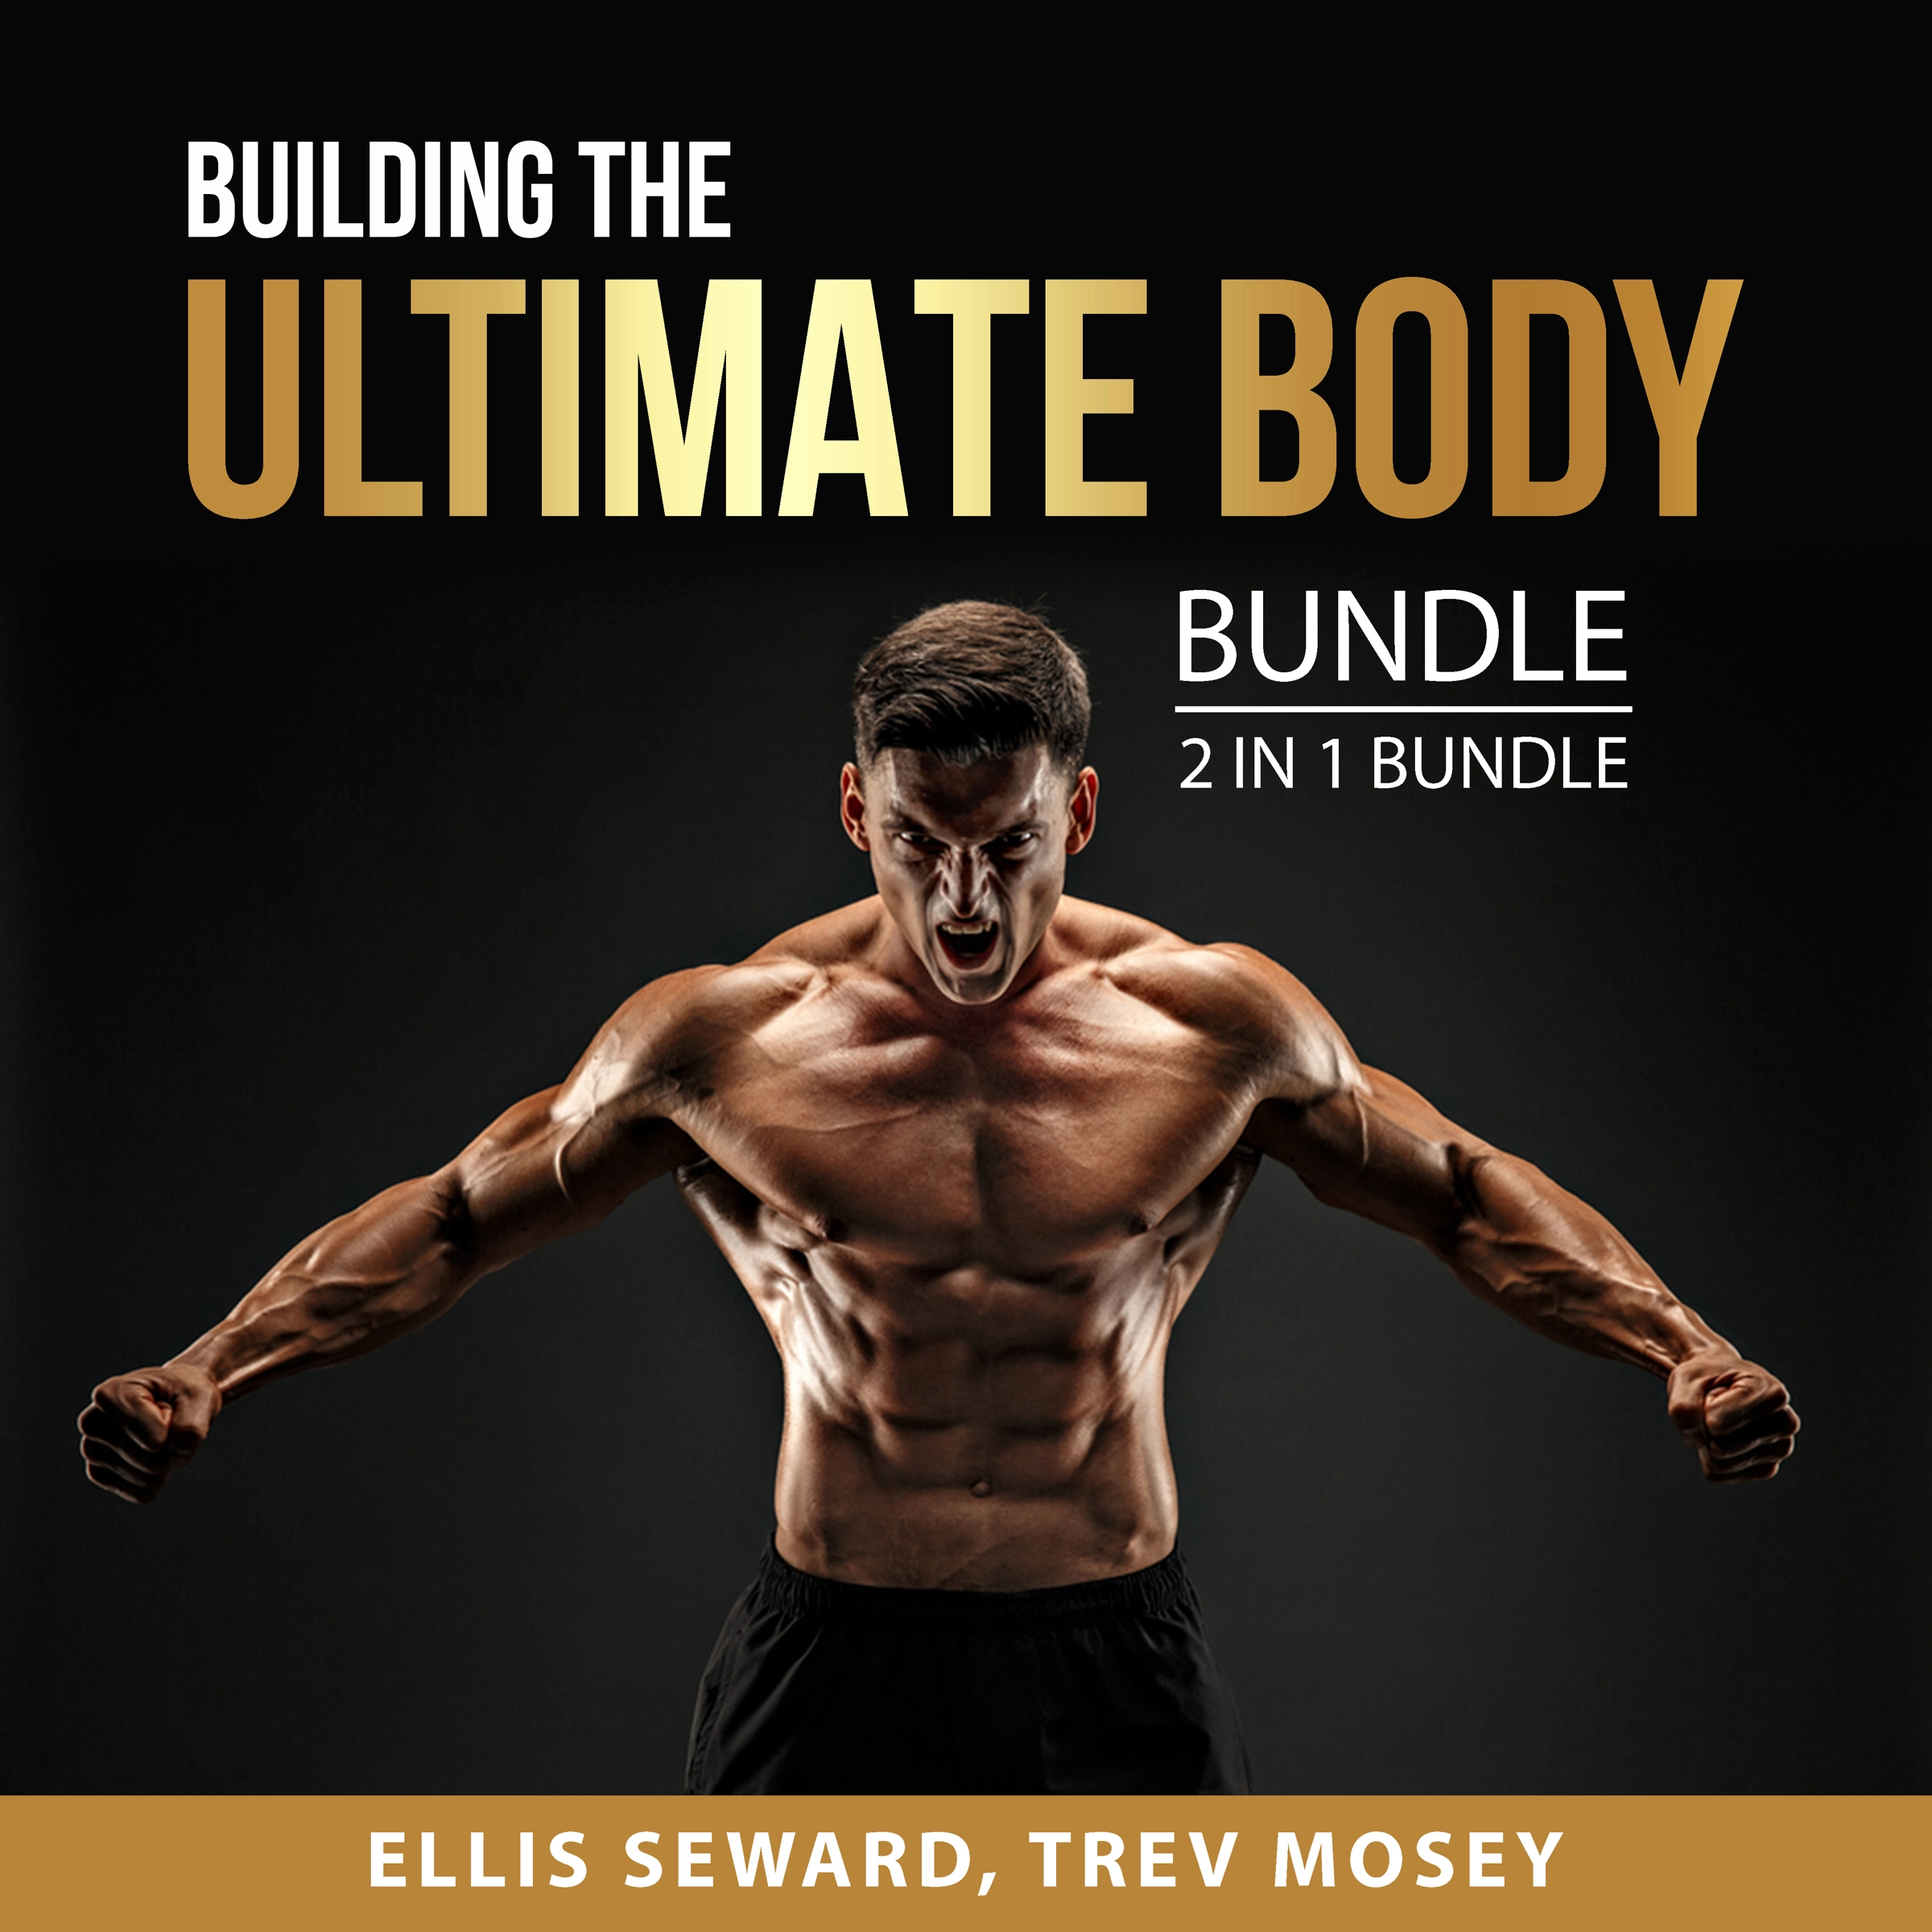 Building the Ultimate Body Bundle, 2 in 1 Bundle Audiobook by Trev Mosey